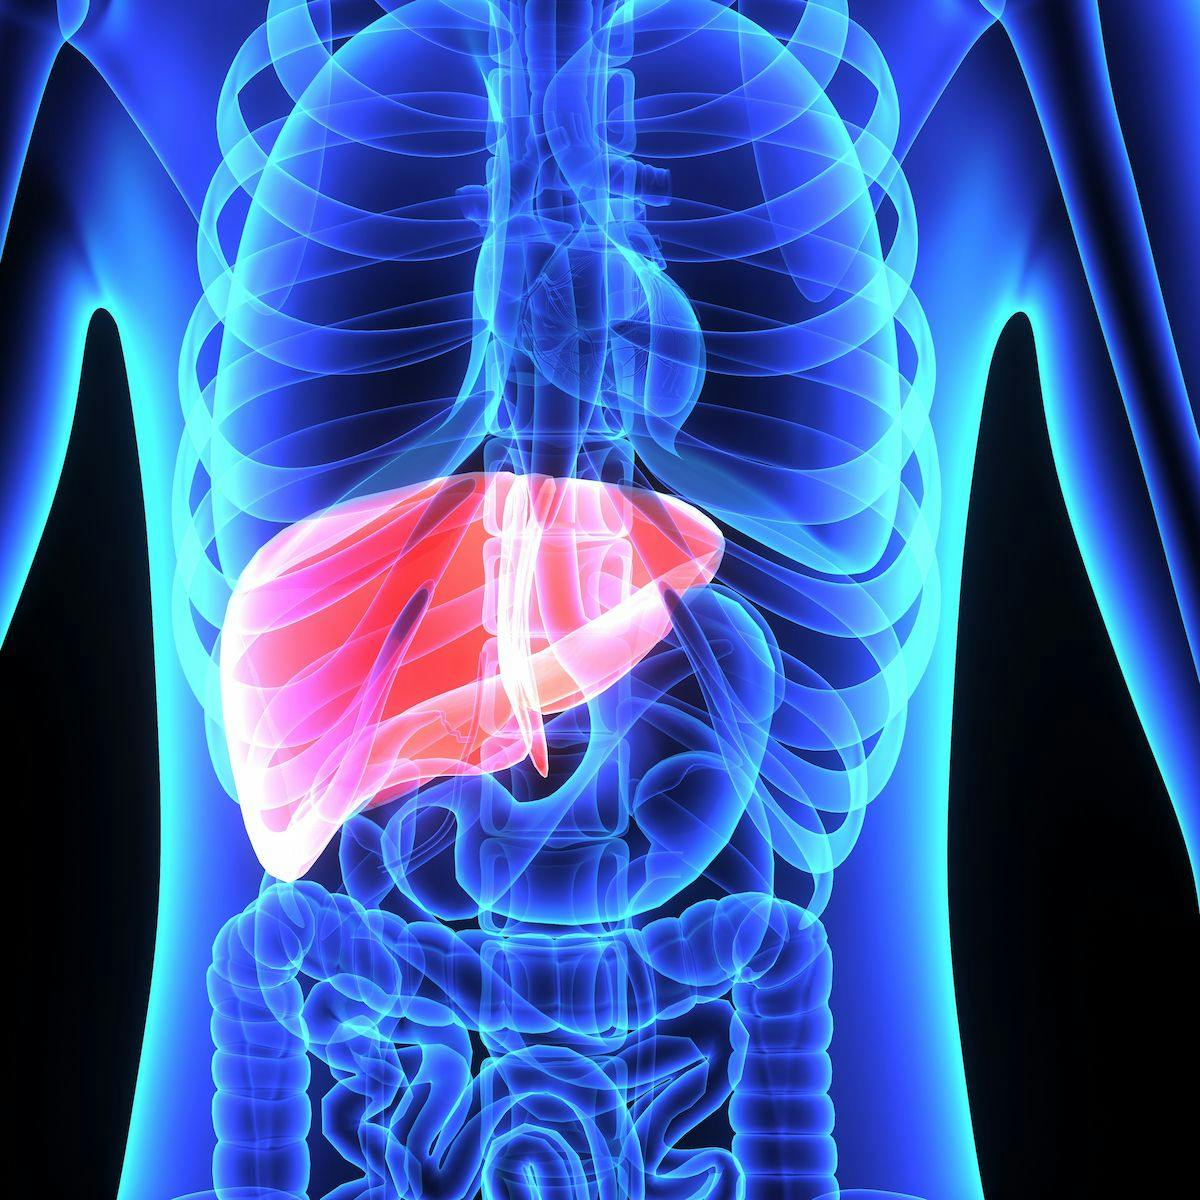 Patients with advanced hepatocellular carcinoma achieved a statically significant and clinically meaningful survival benefit following treatment with pembrolizumab and best supportive care in the second line.